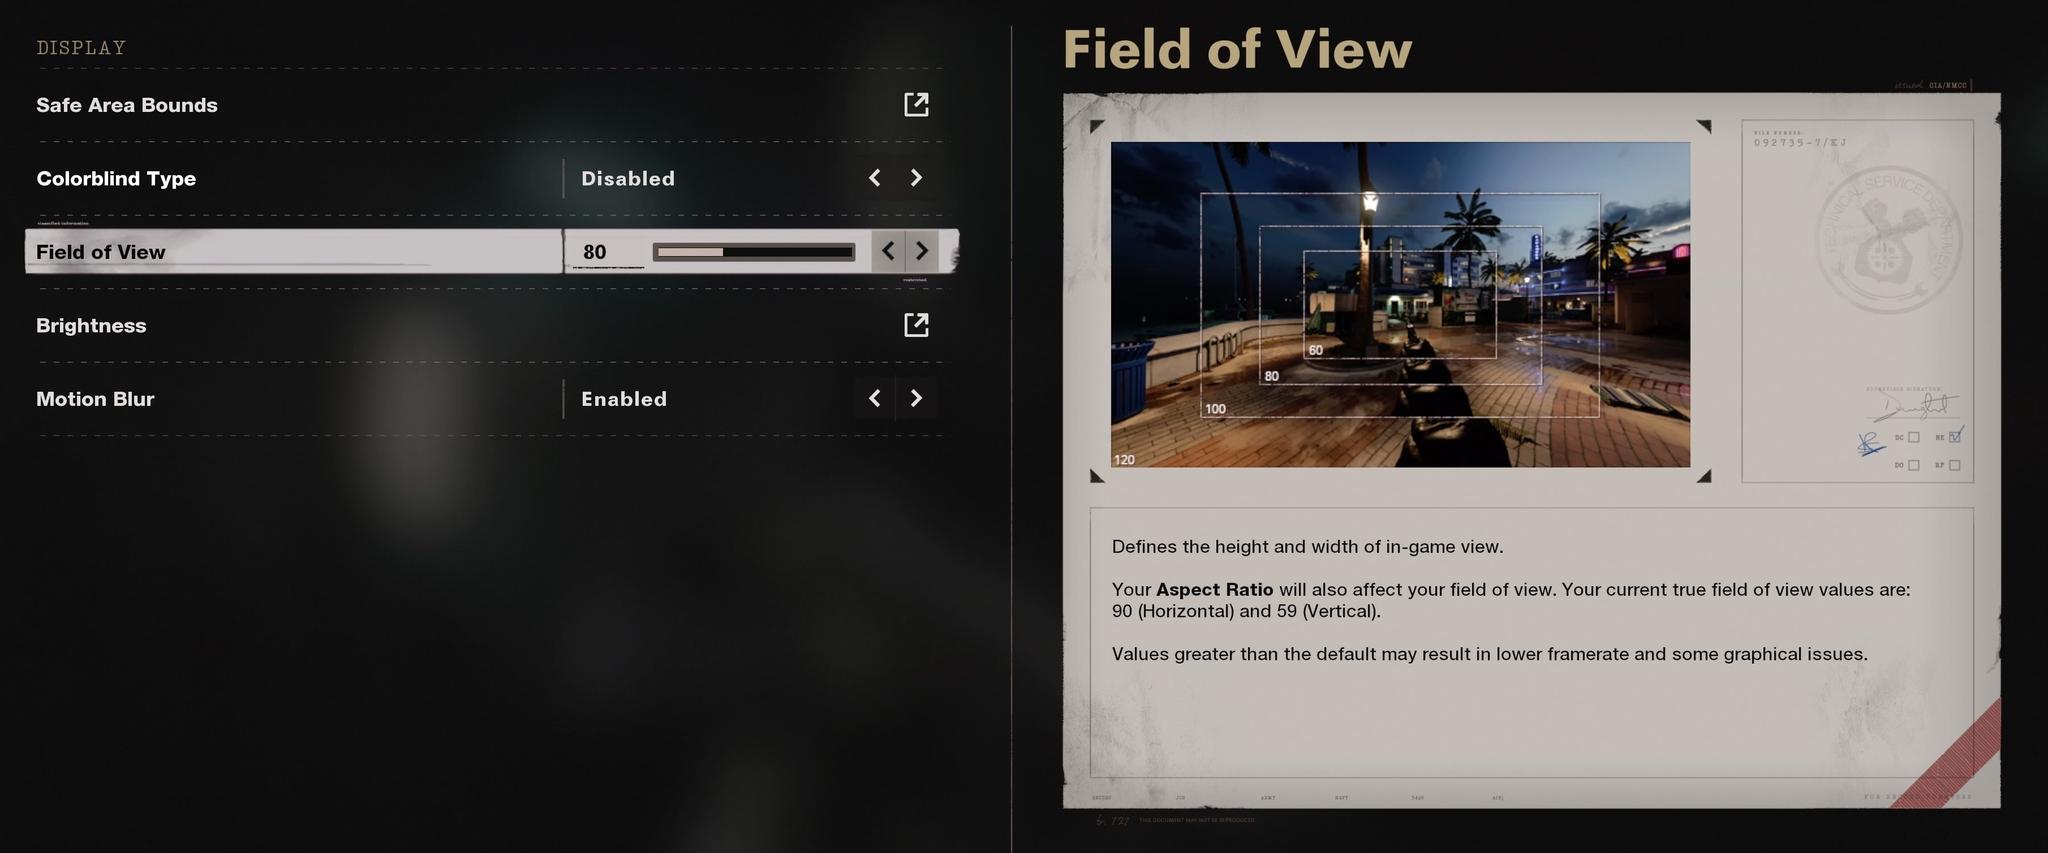 Field of View Settings